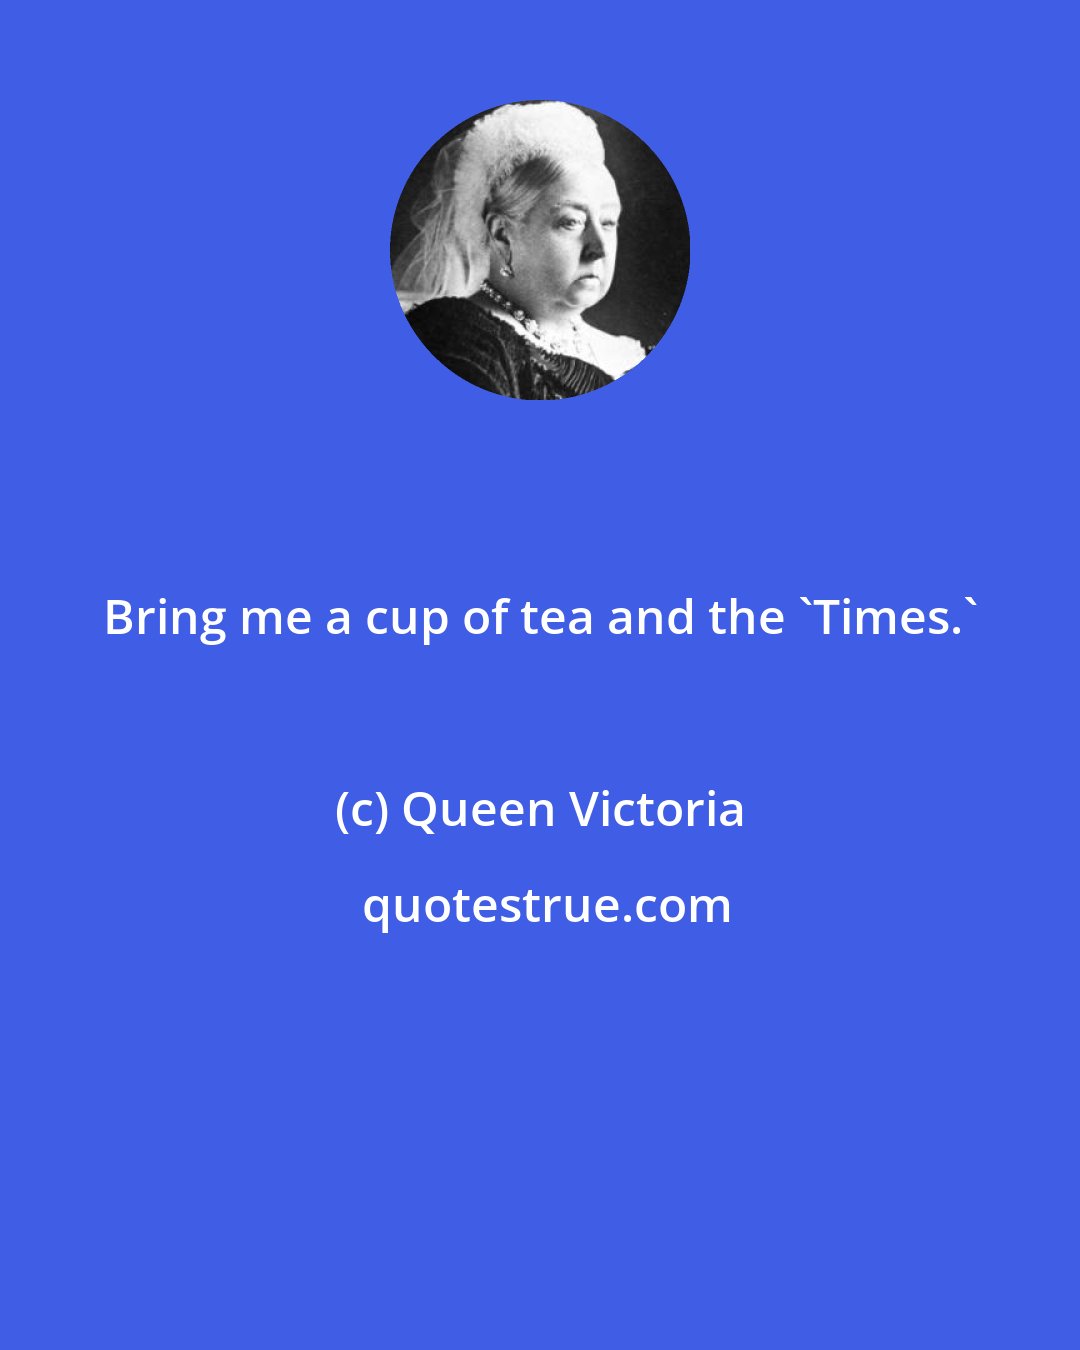 Queen Victoria: Bring me a cup of tea and the 'Times.'